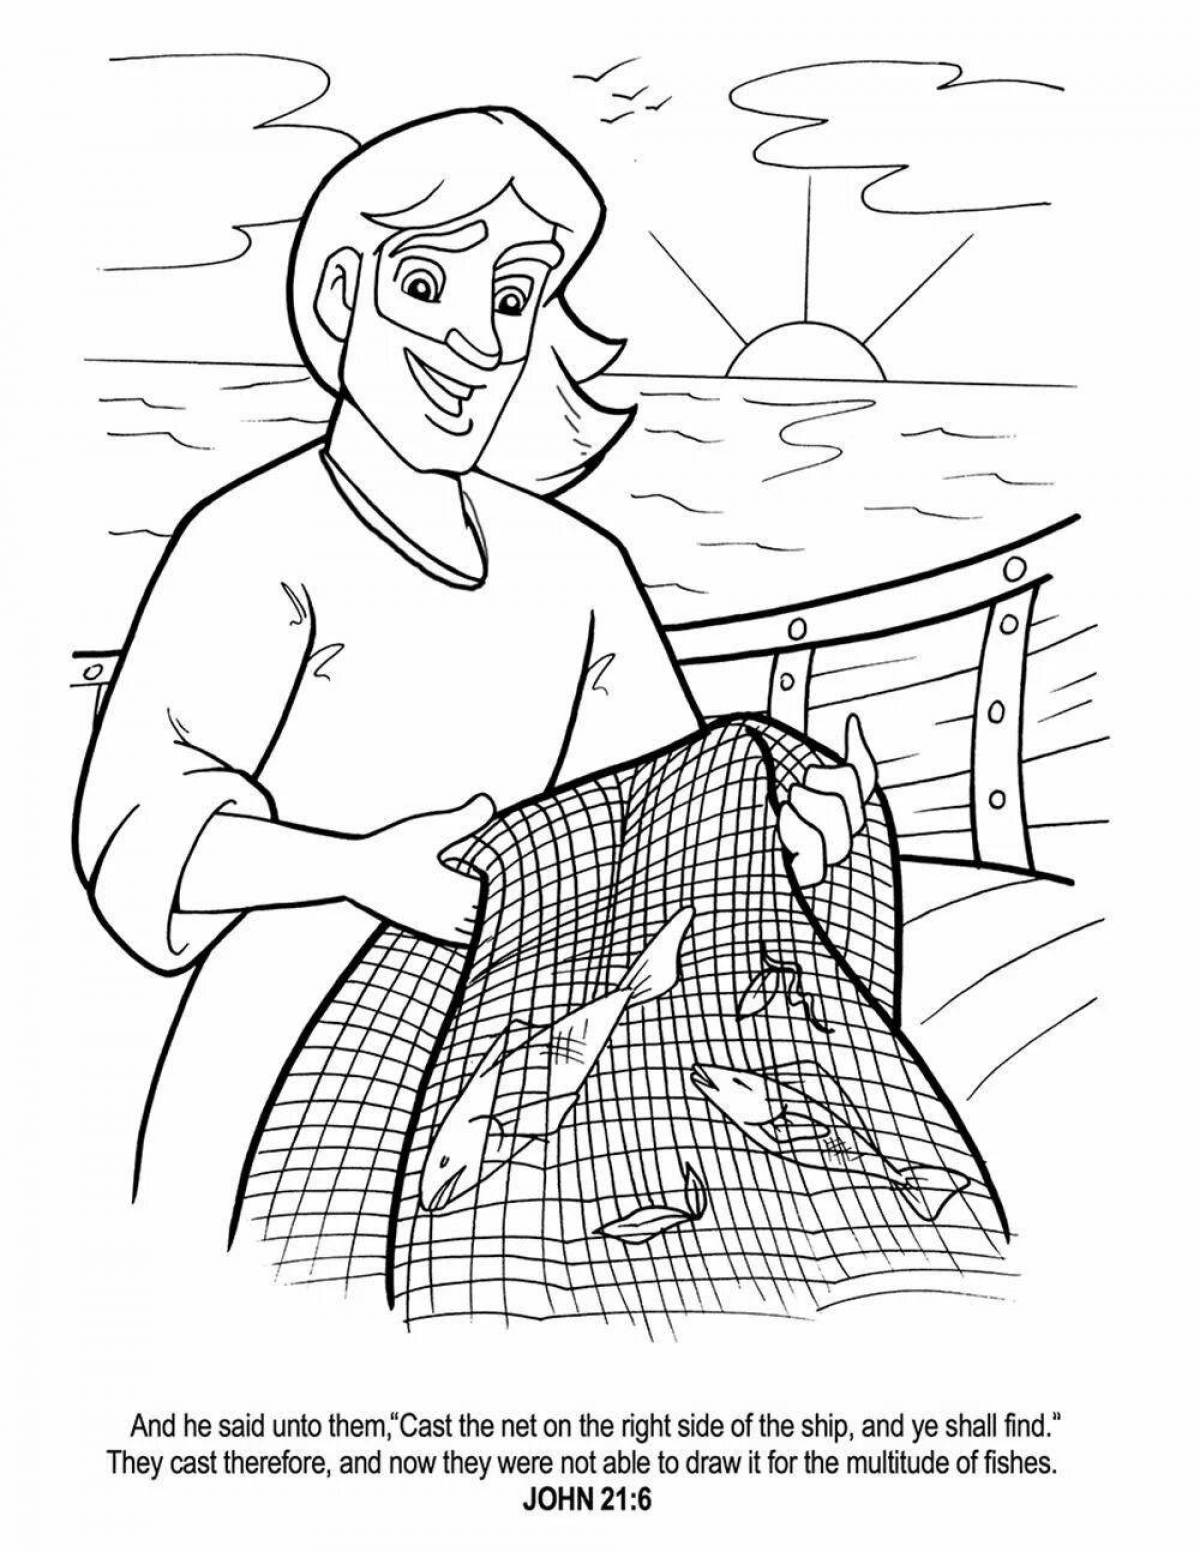 Dreamy coloring book based on the tale of the fisherman and the fish drawing